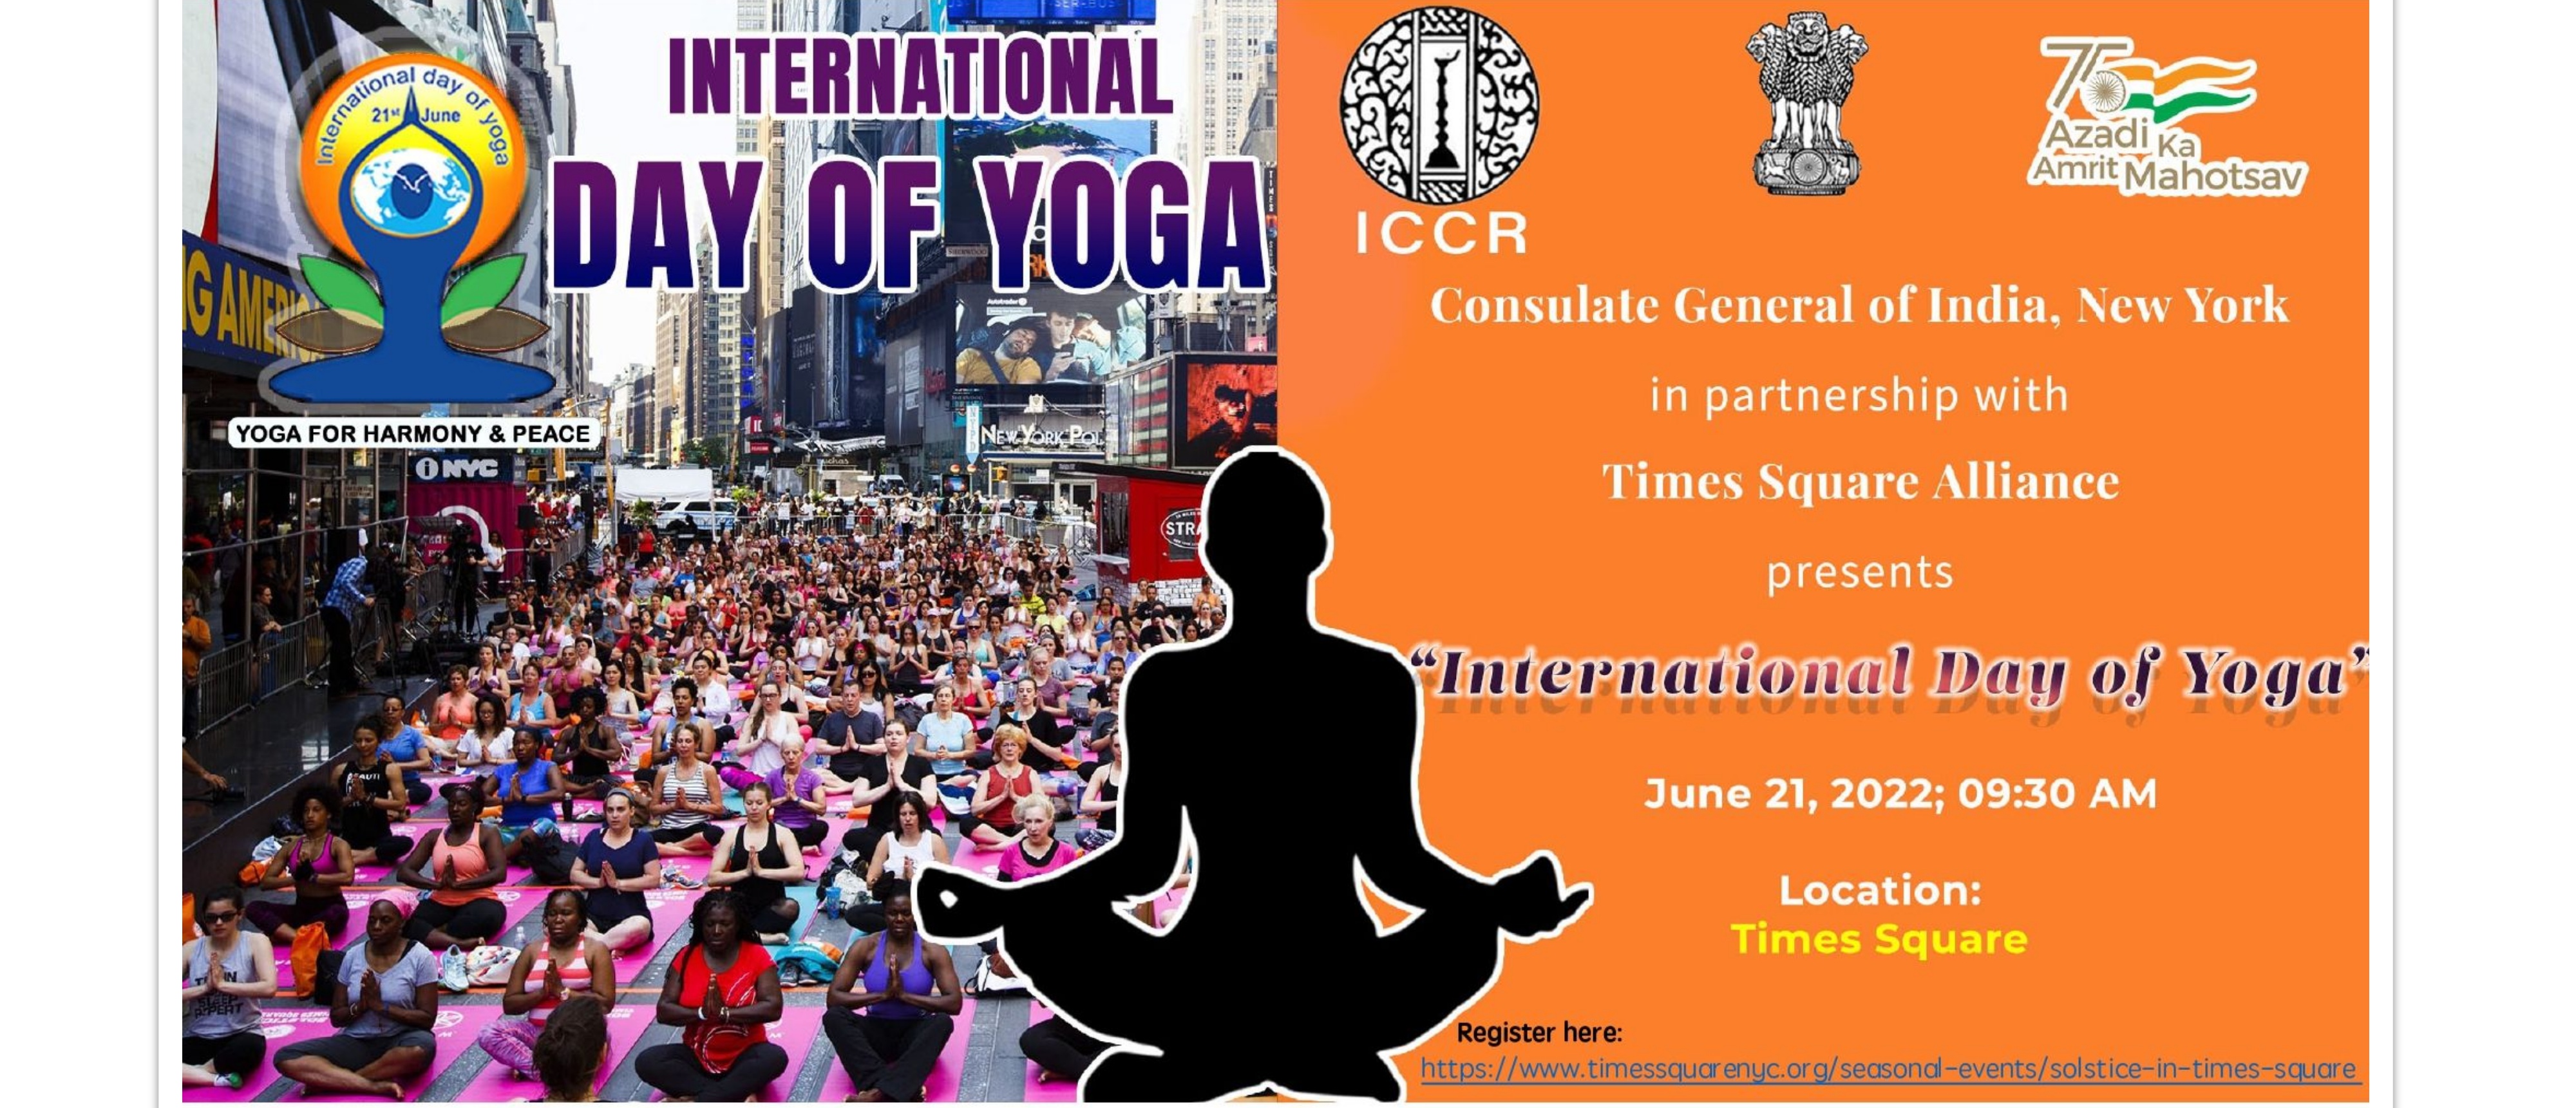  Celebration of International Day of Yoga at Times Square